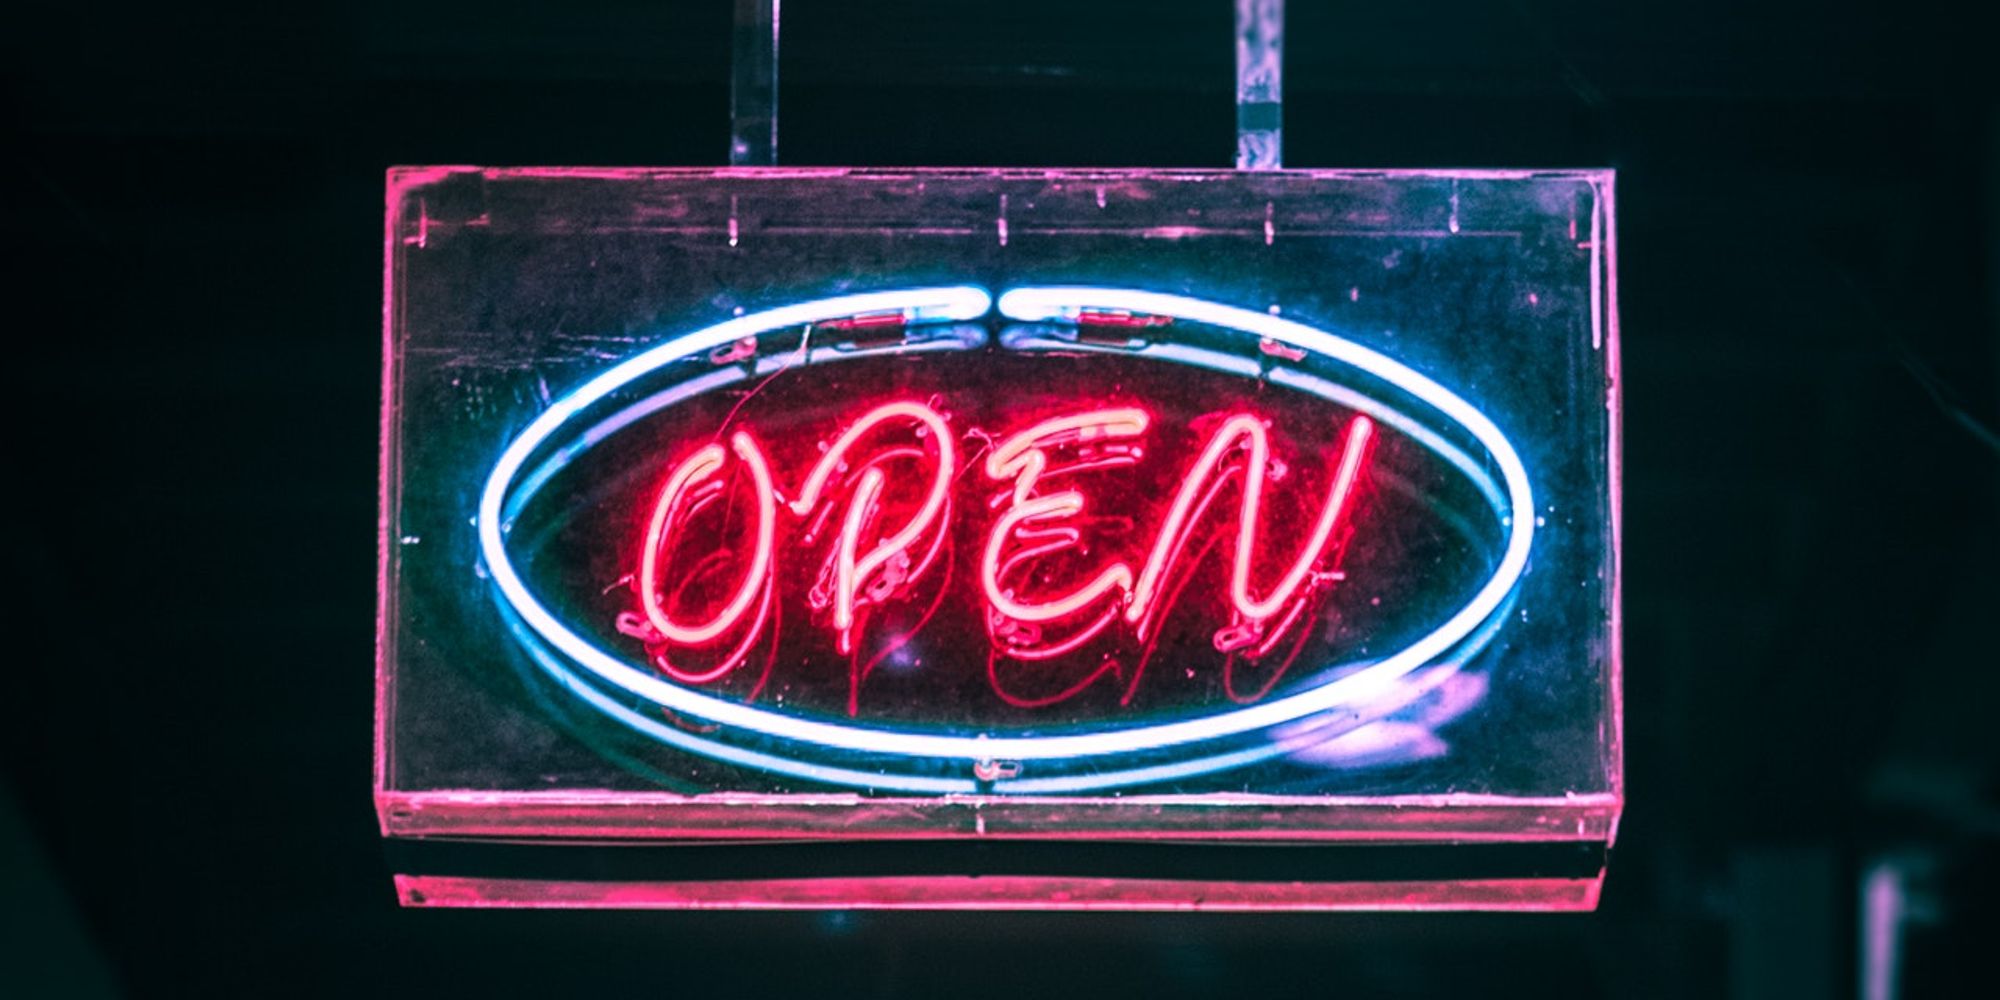 Open Neon Signage Turned On 2995188